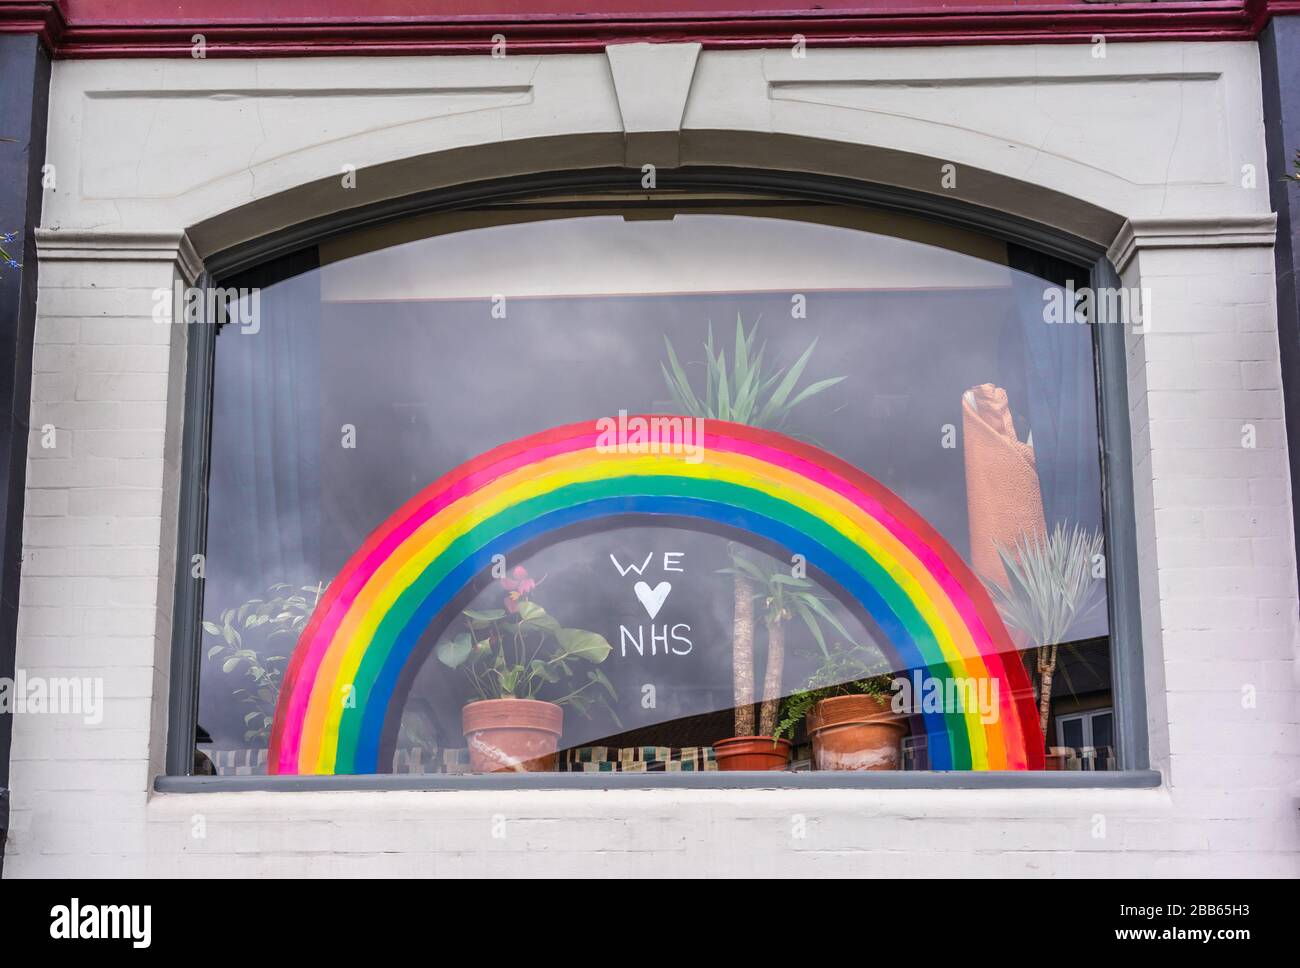 A window with a rainbow and the quote 'We love NHS' symbolising hope during the Coronavirus pandemic in March 2020, Southampton, England, UK Stock Photo